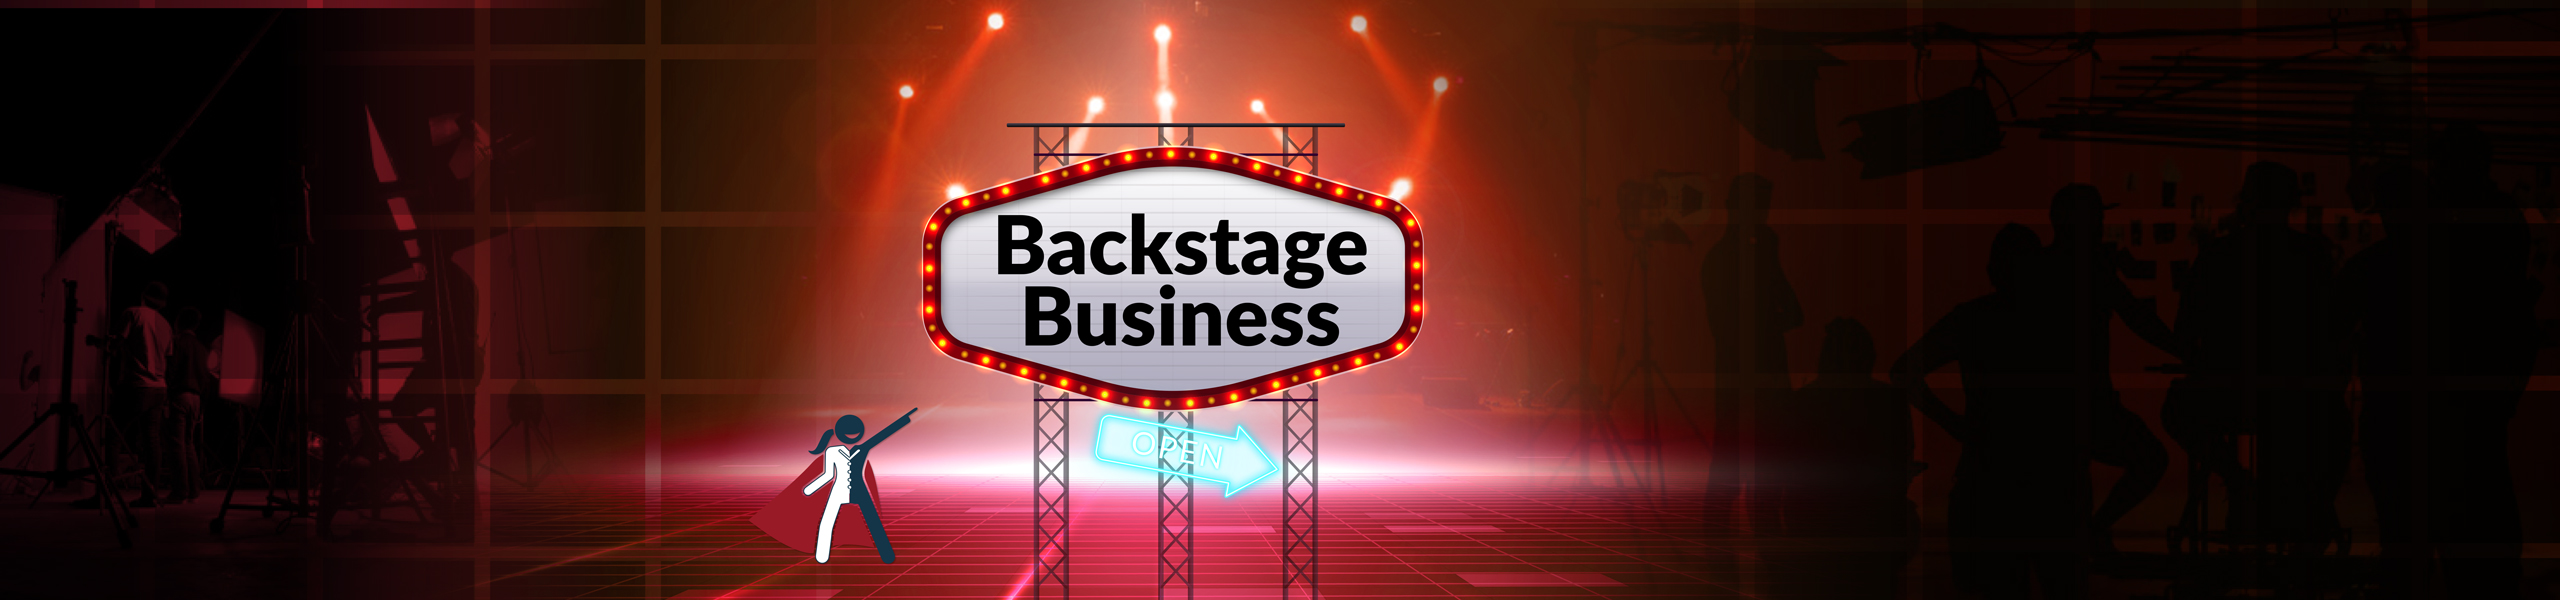 backstage web banners 2400x600